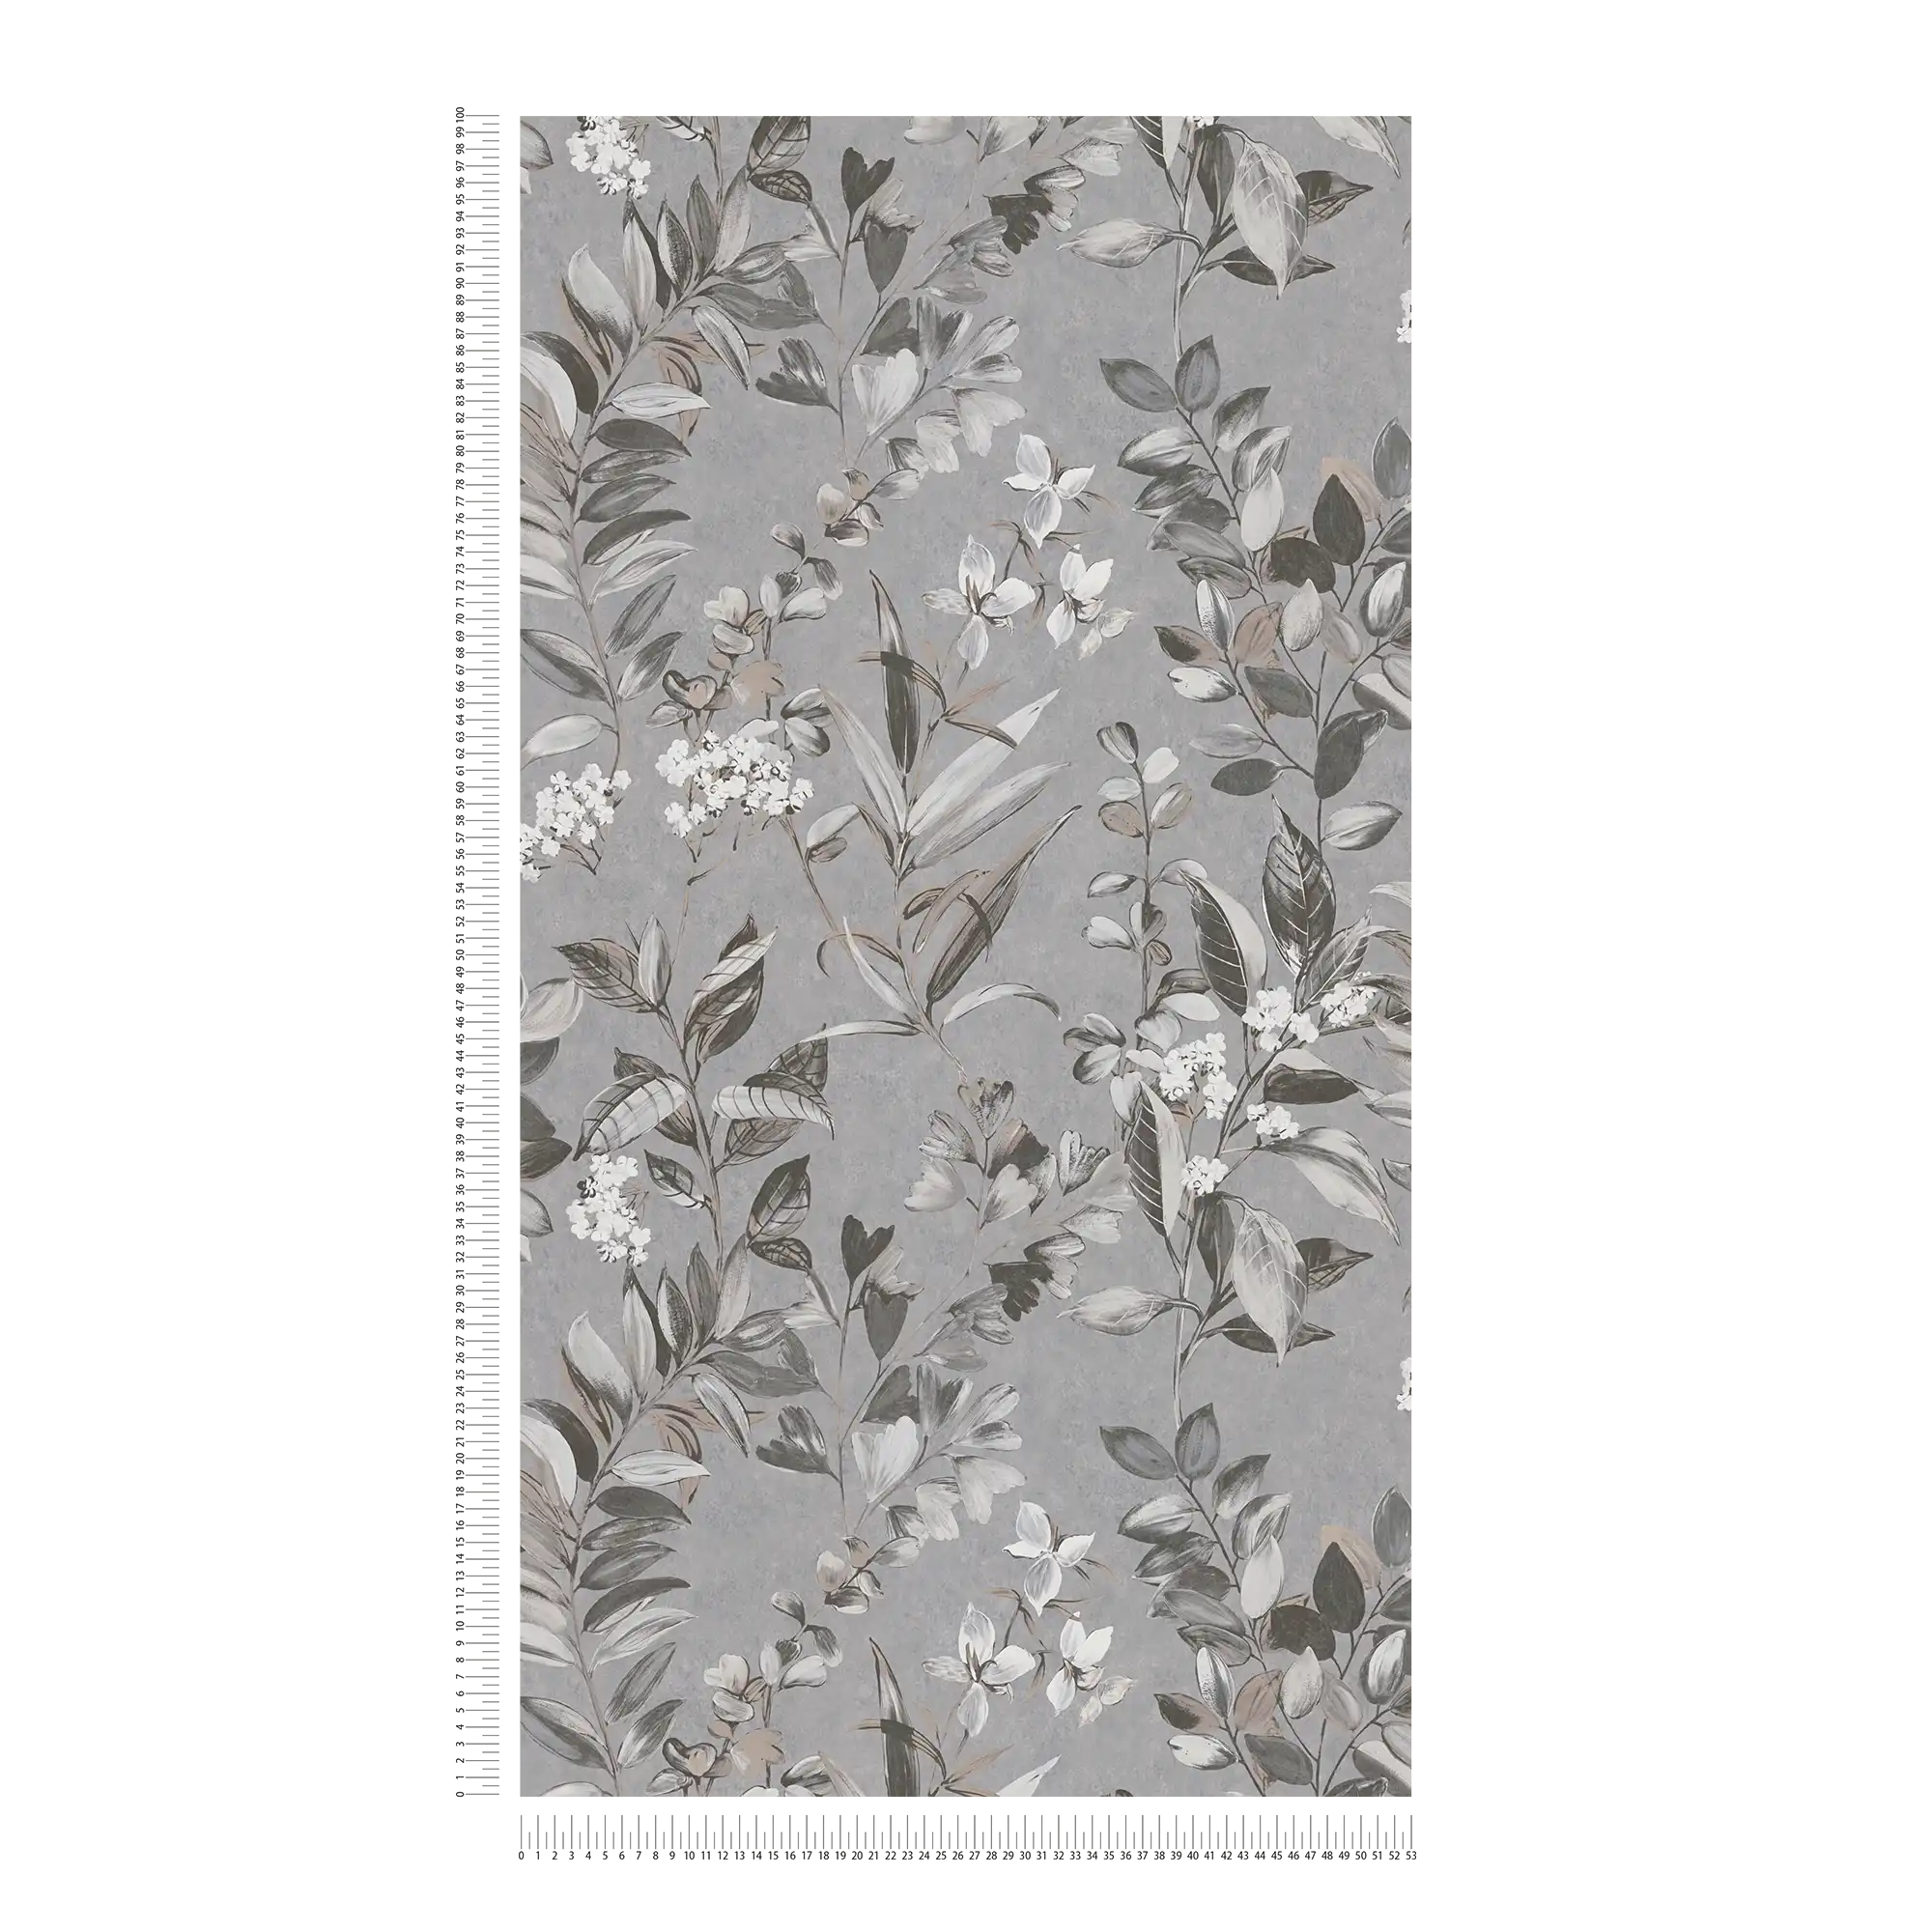             Non-woven wallpaper with floral pattern - grey, white, black
        